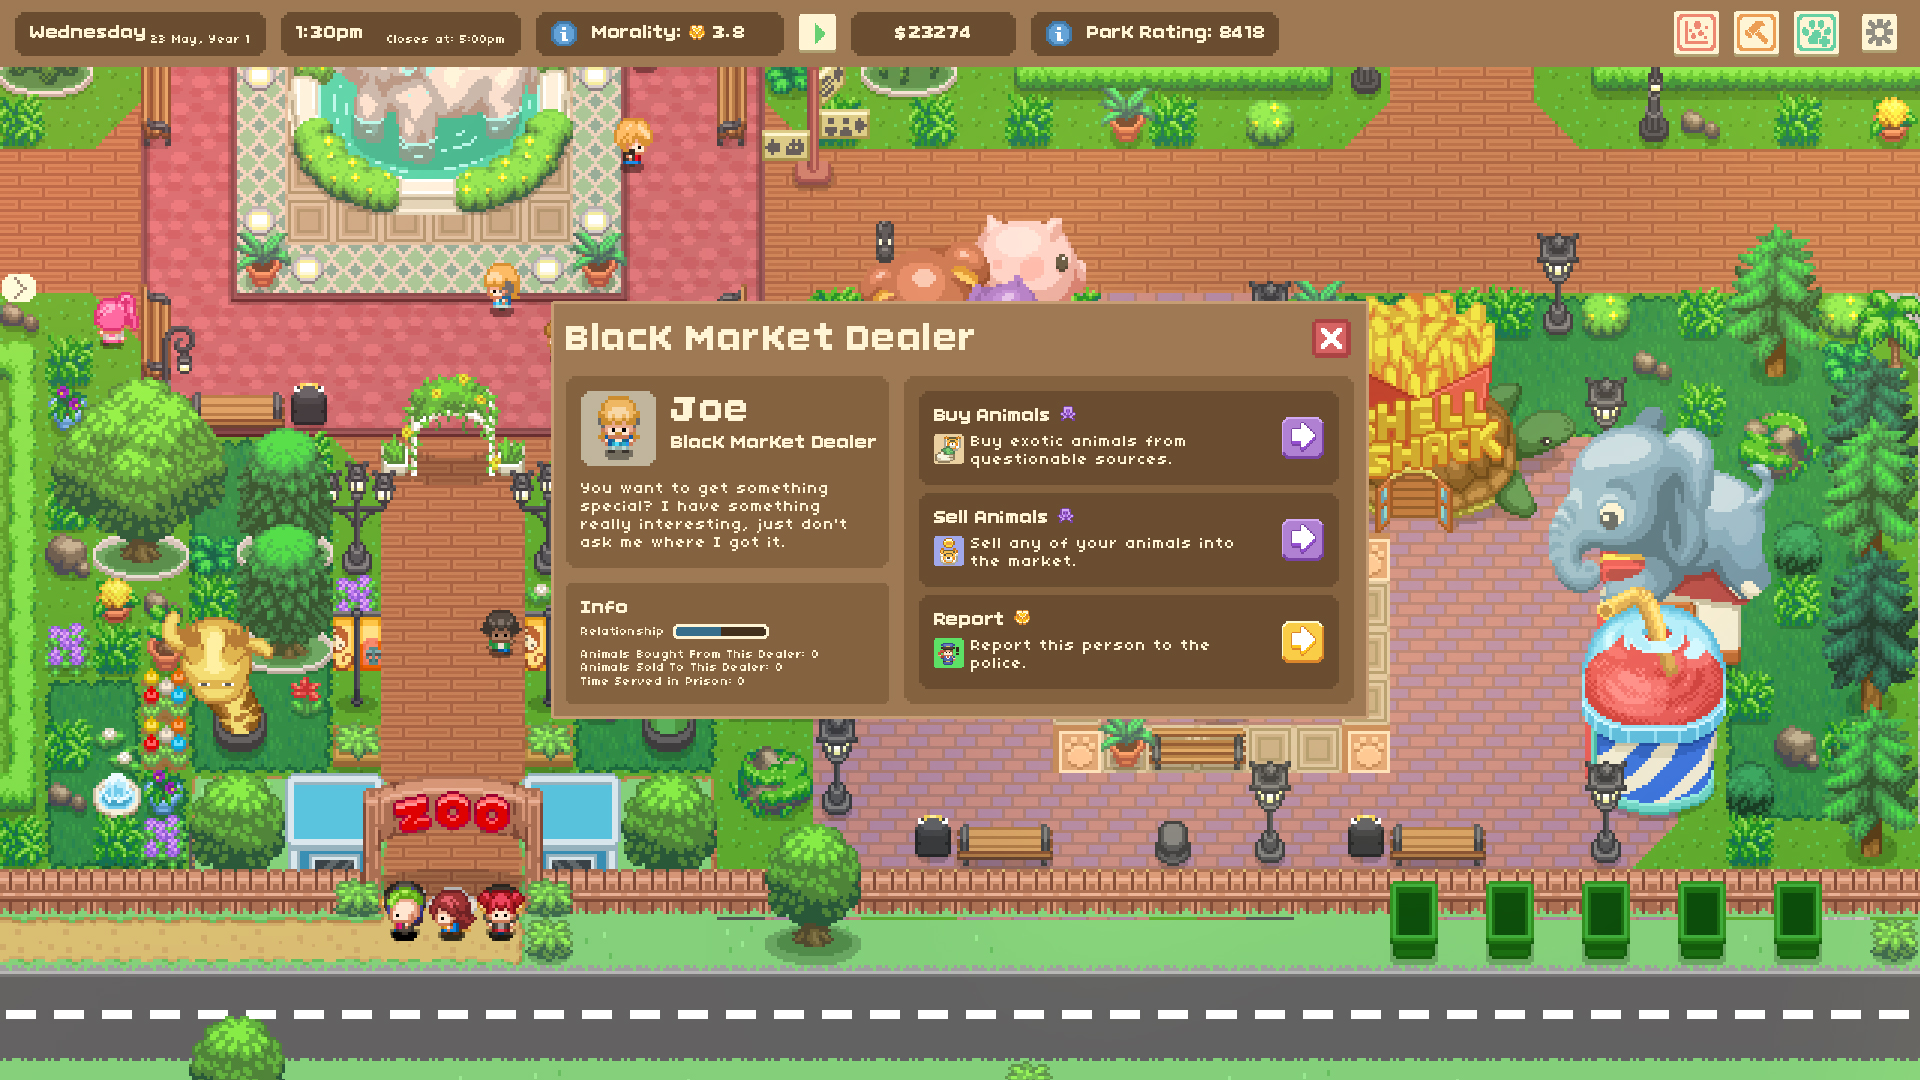 Who would report an innocent black market animal dealer to the police? (Screenshot: Springloaded Games)